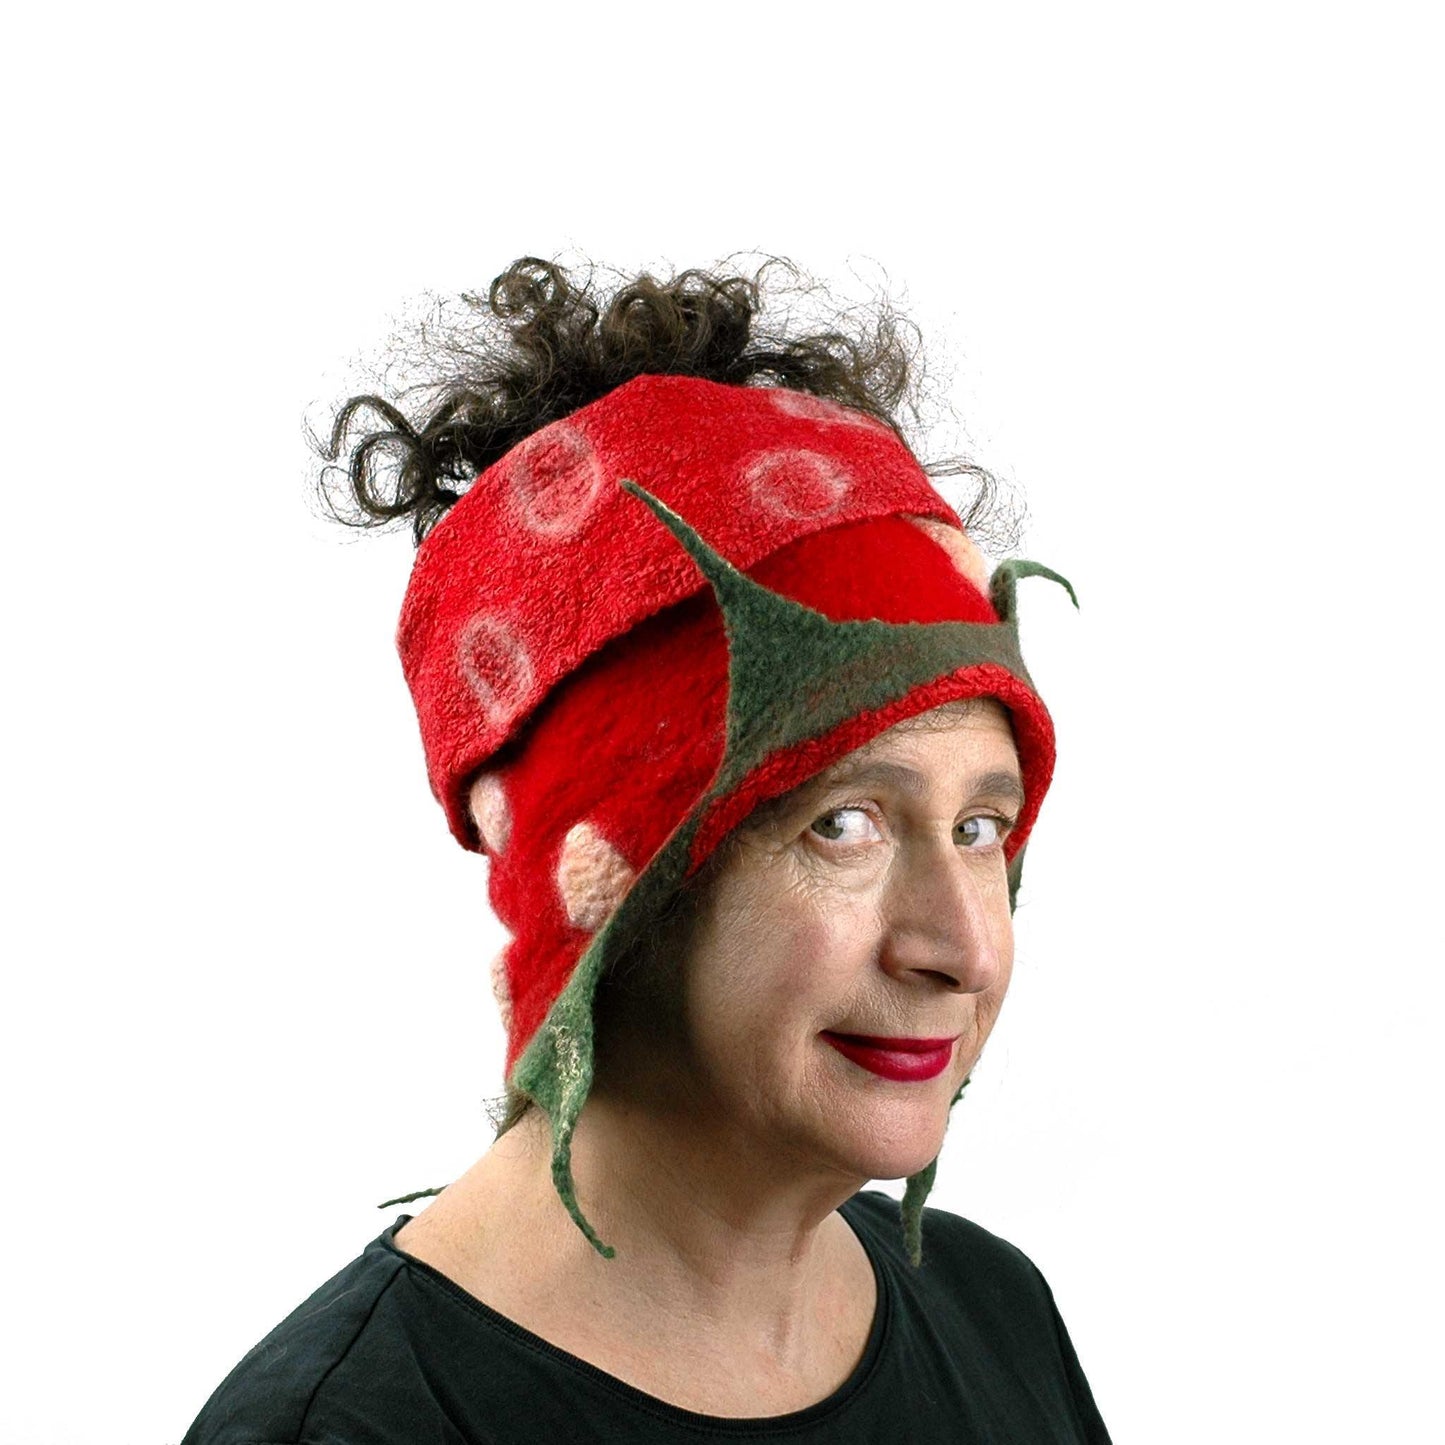 Whimsical Red Strawberry Neck Warmer with Green Leaves - worn as a head scarf.